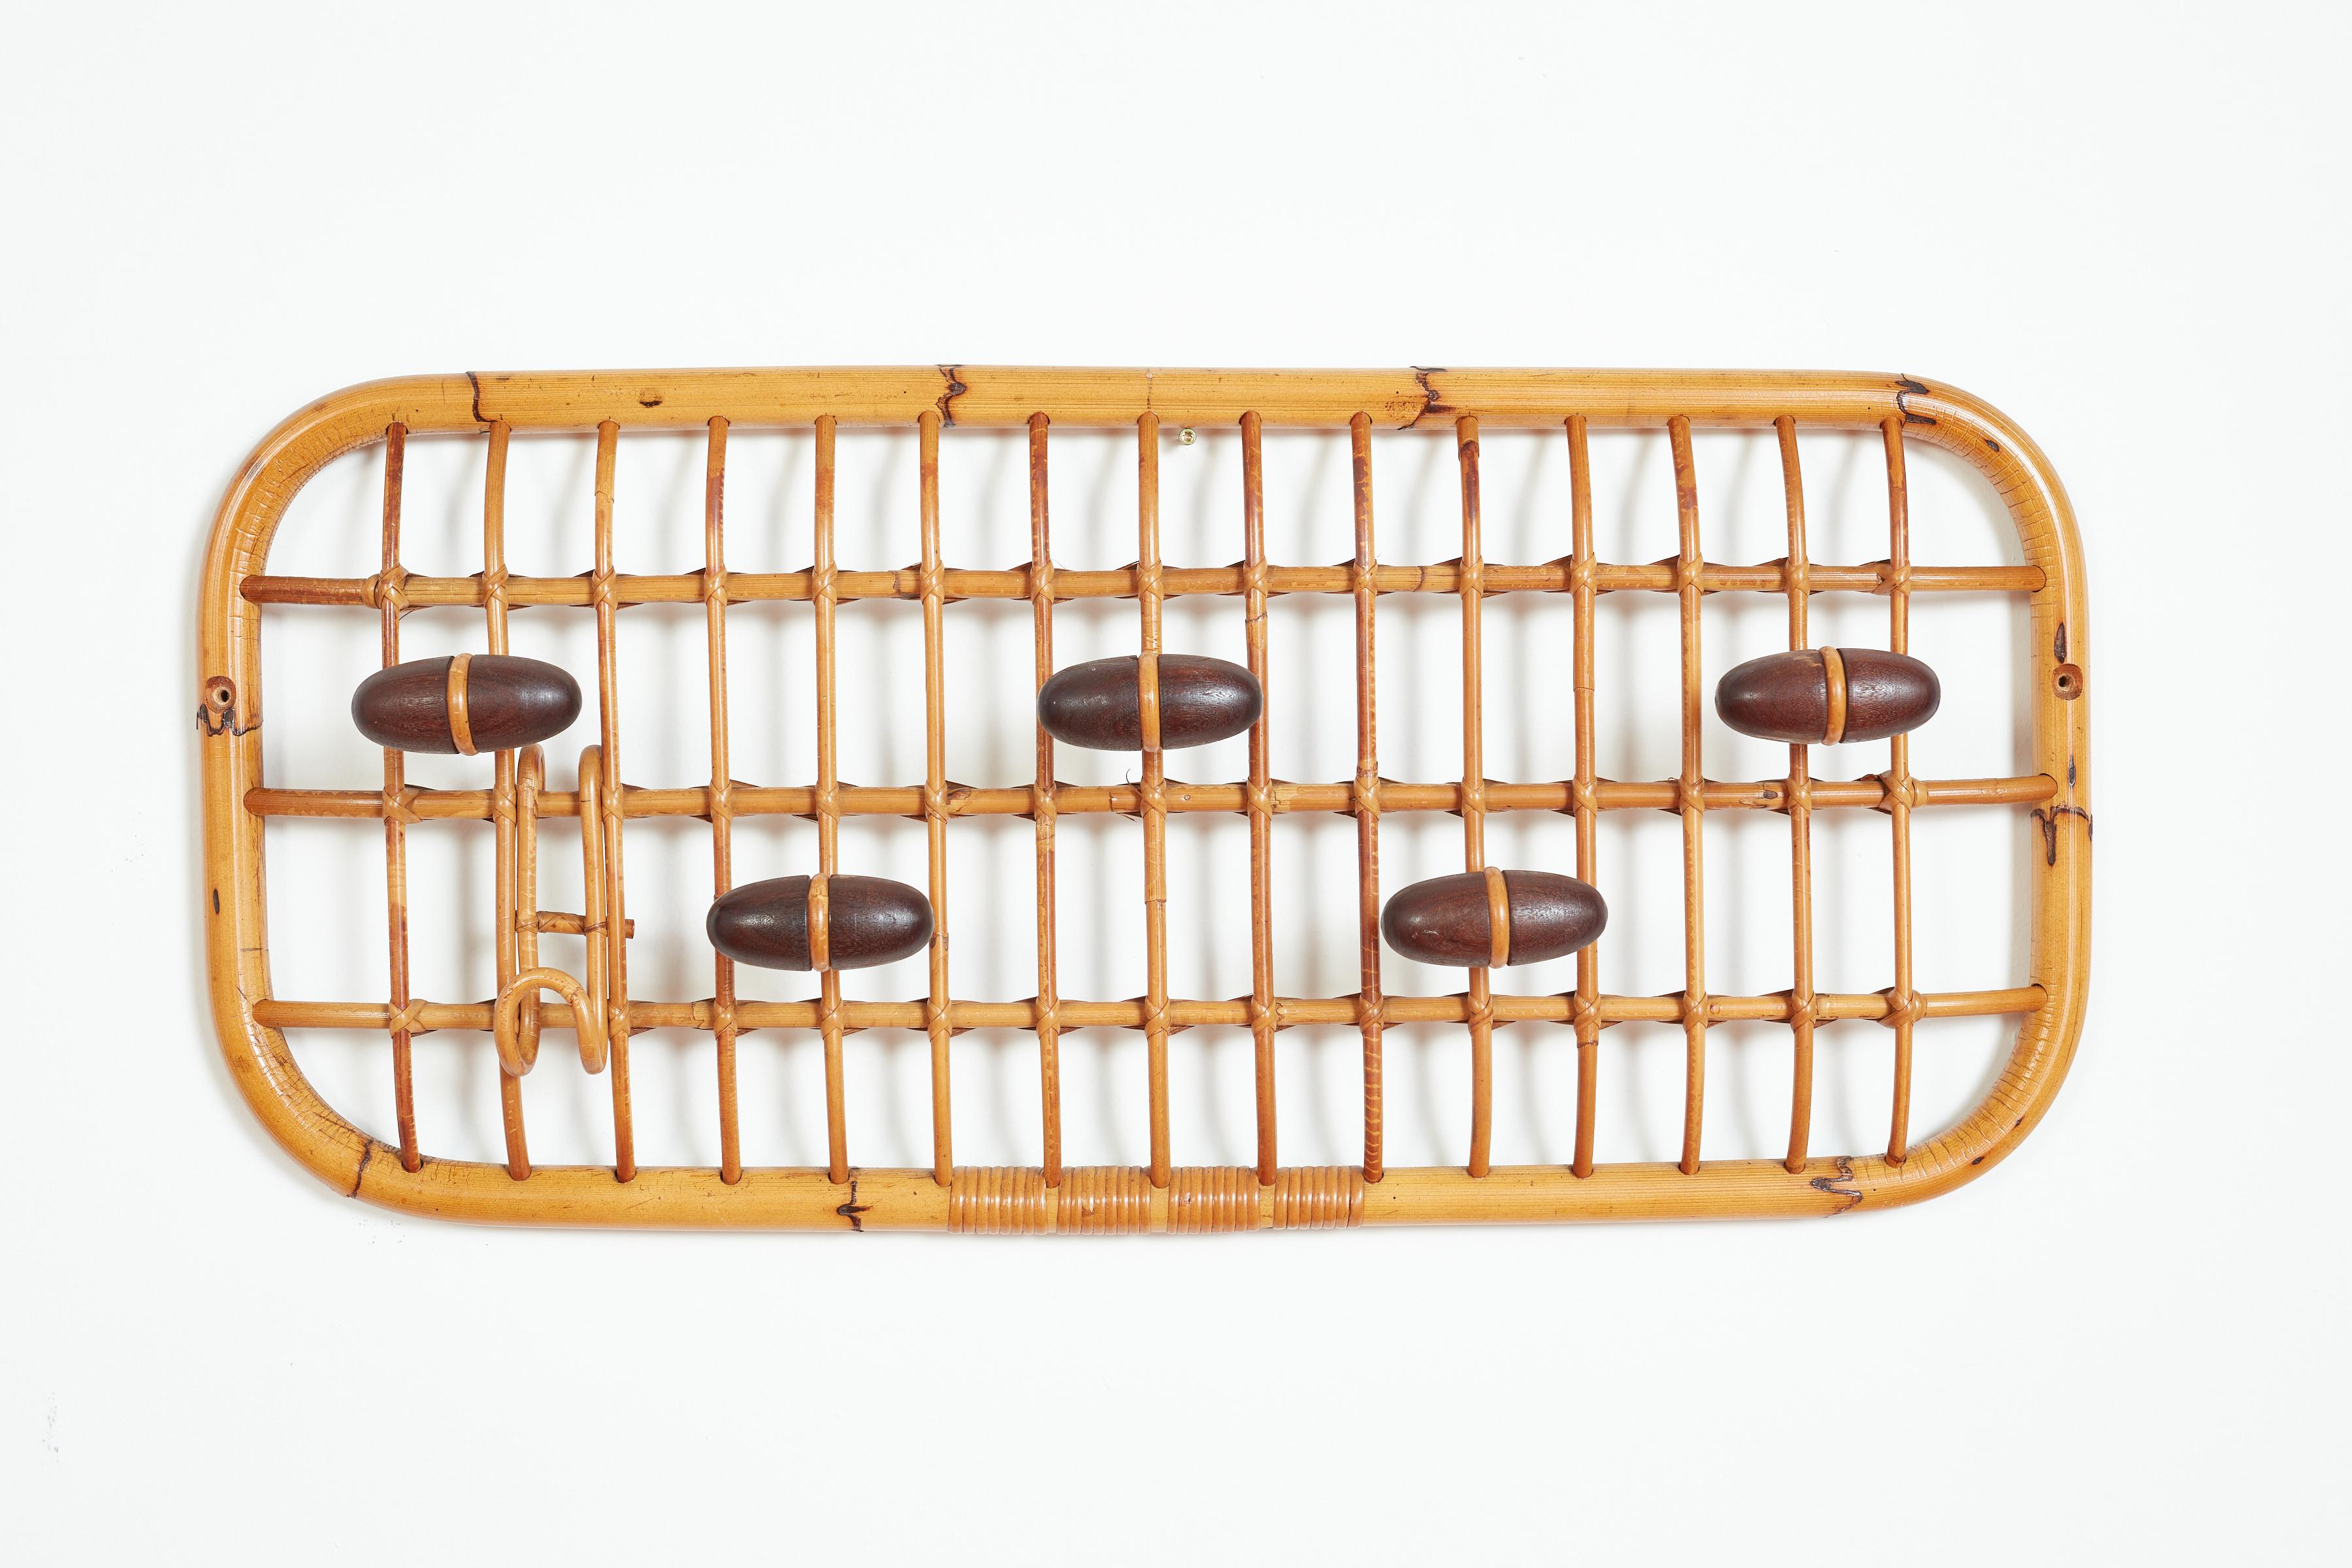 Olaf von Bohr for Bonacina coat rack Italy, circa 1960's  
Bamboo and rattan coat rack  
Five wooden coat hangers and one molded bamboo hook
